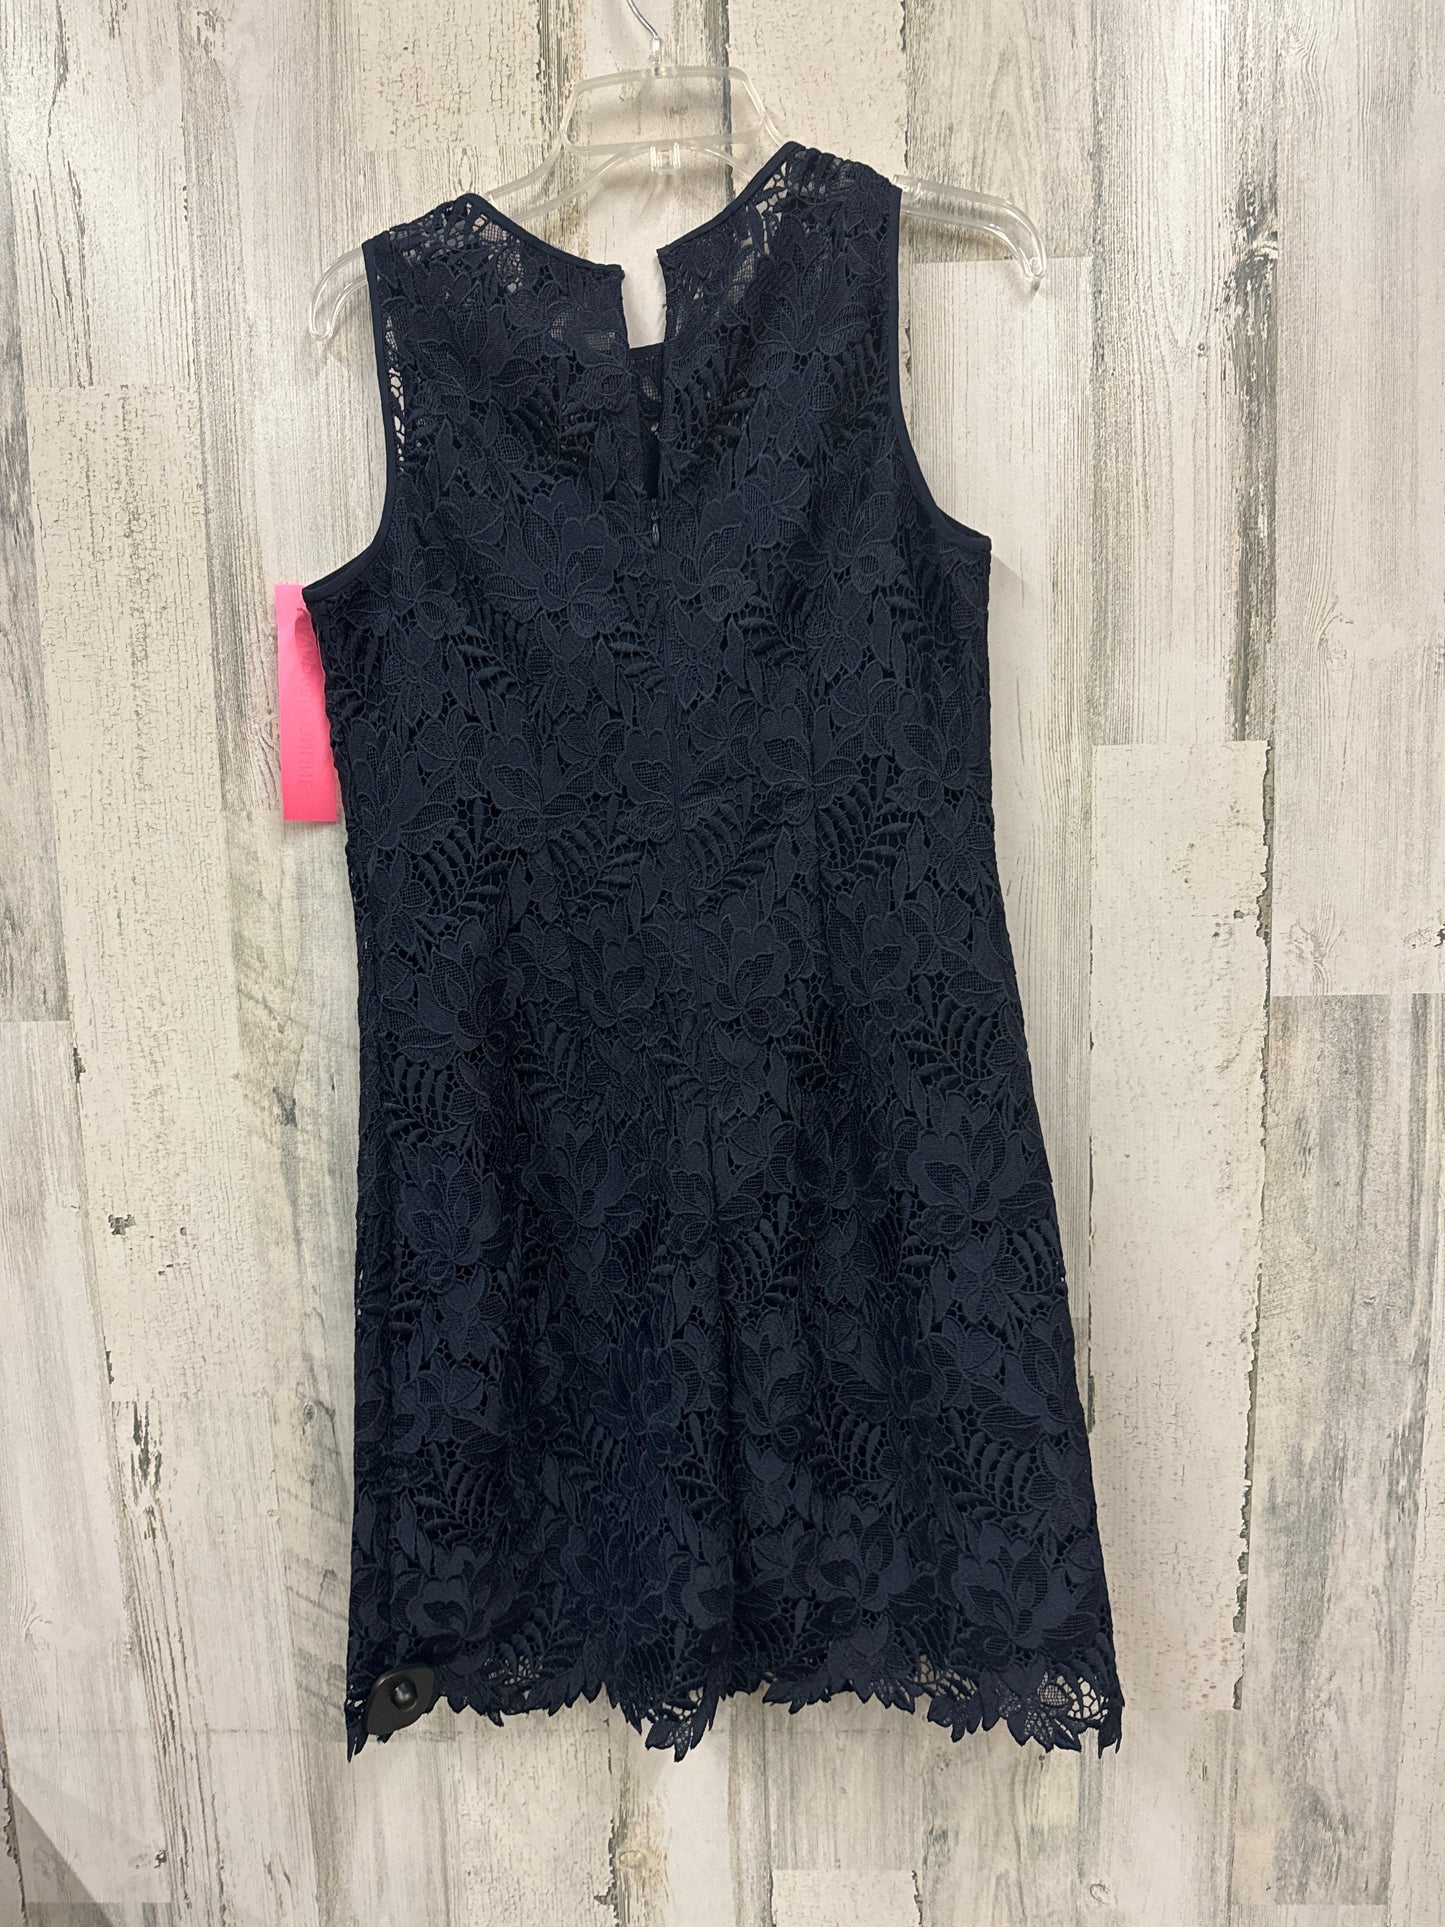 Dress Casual Short By Ann Taylor  Size: S